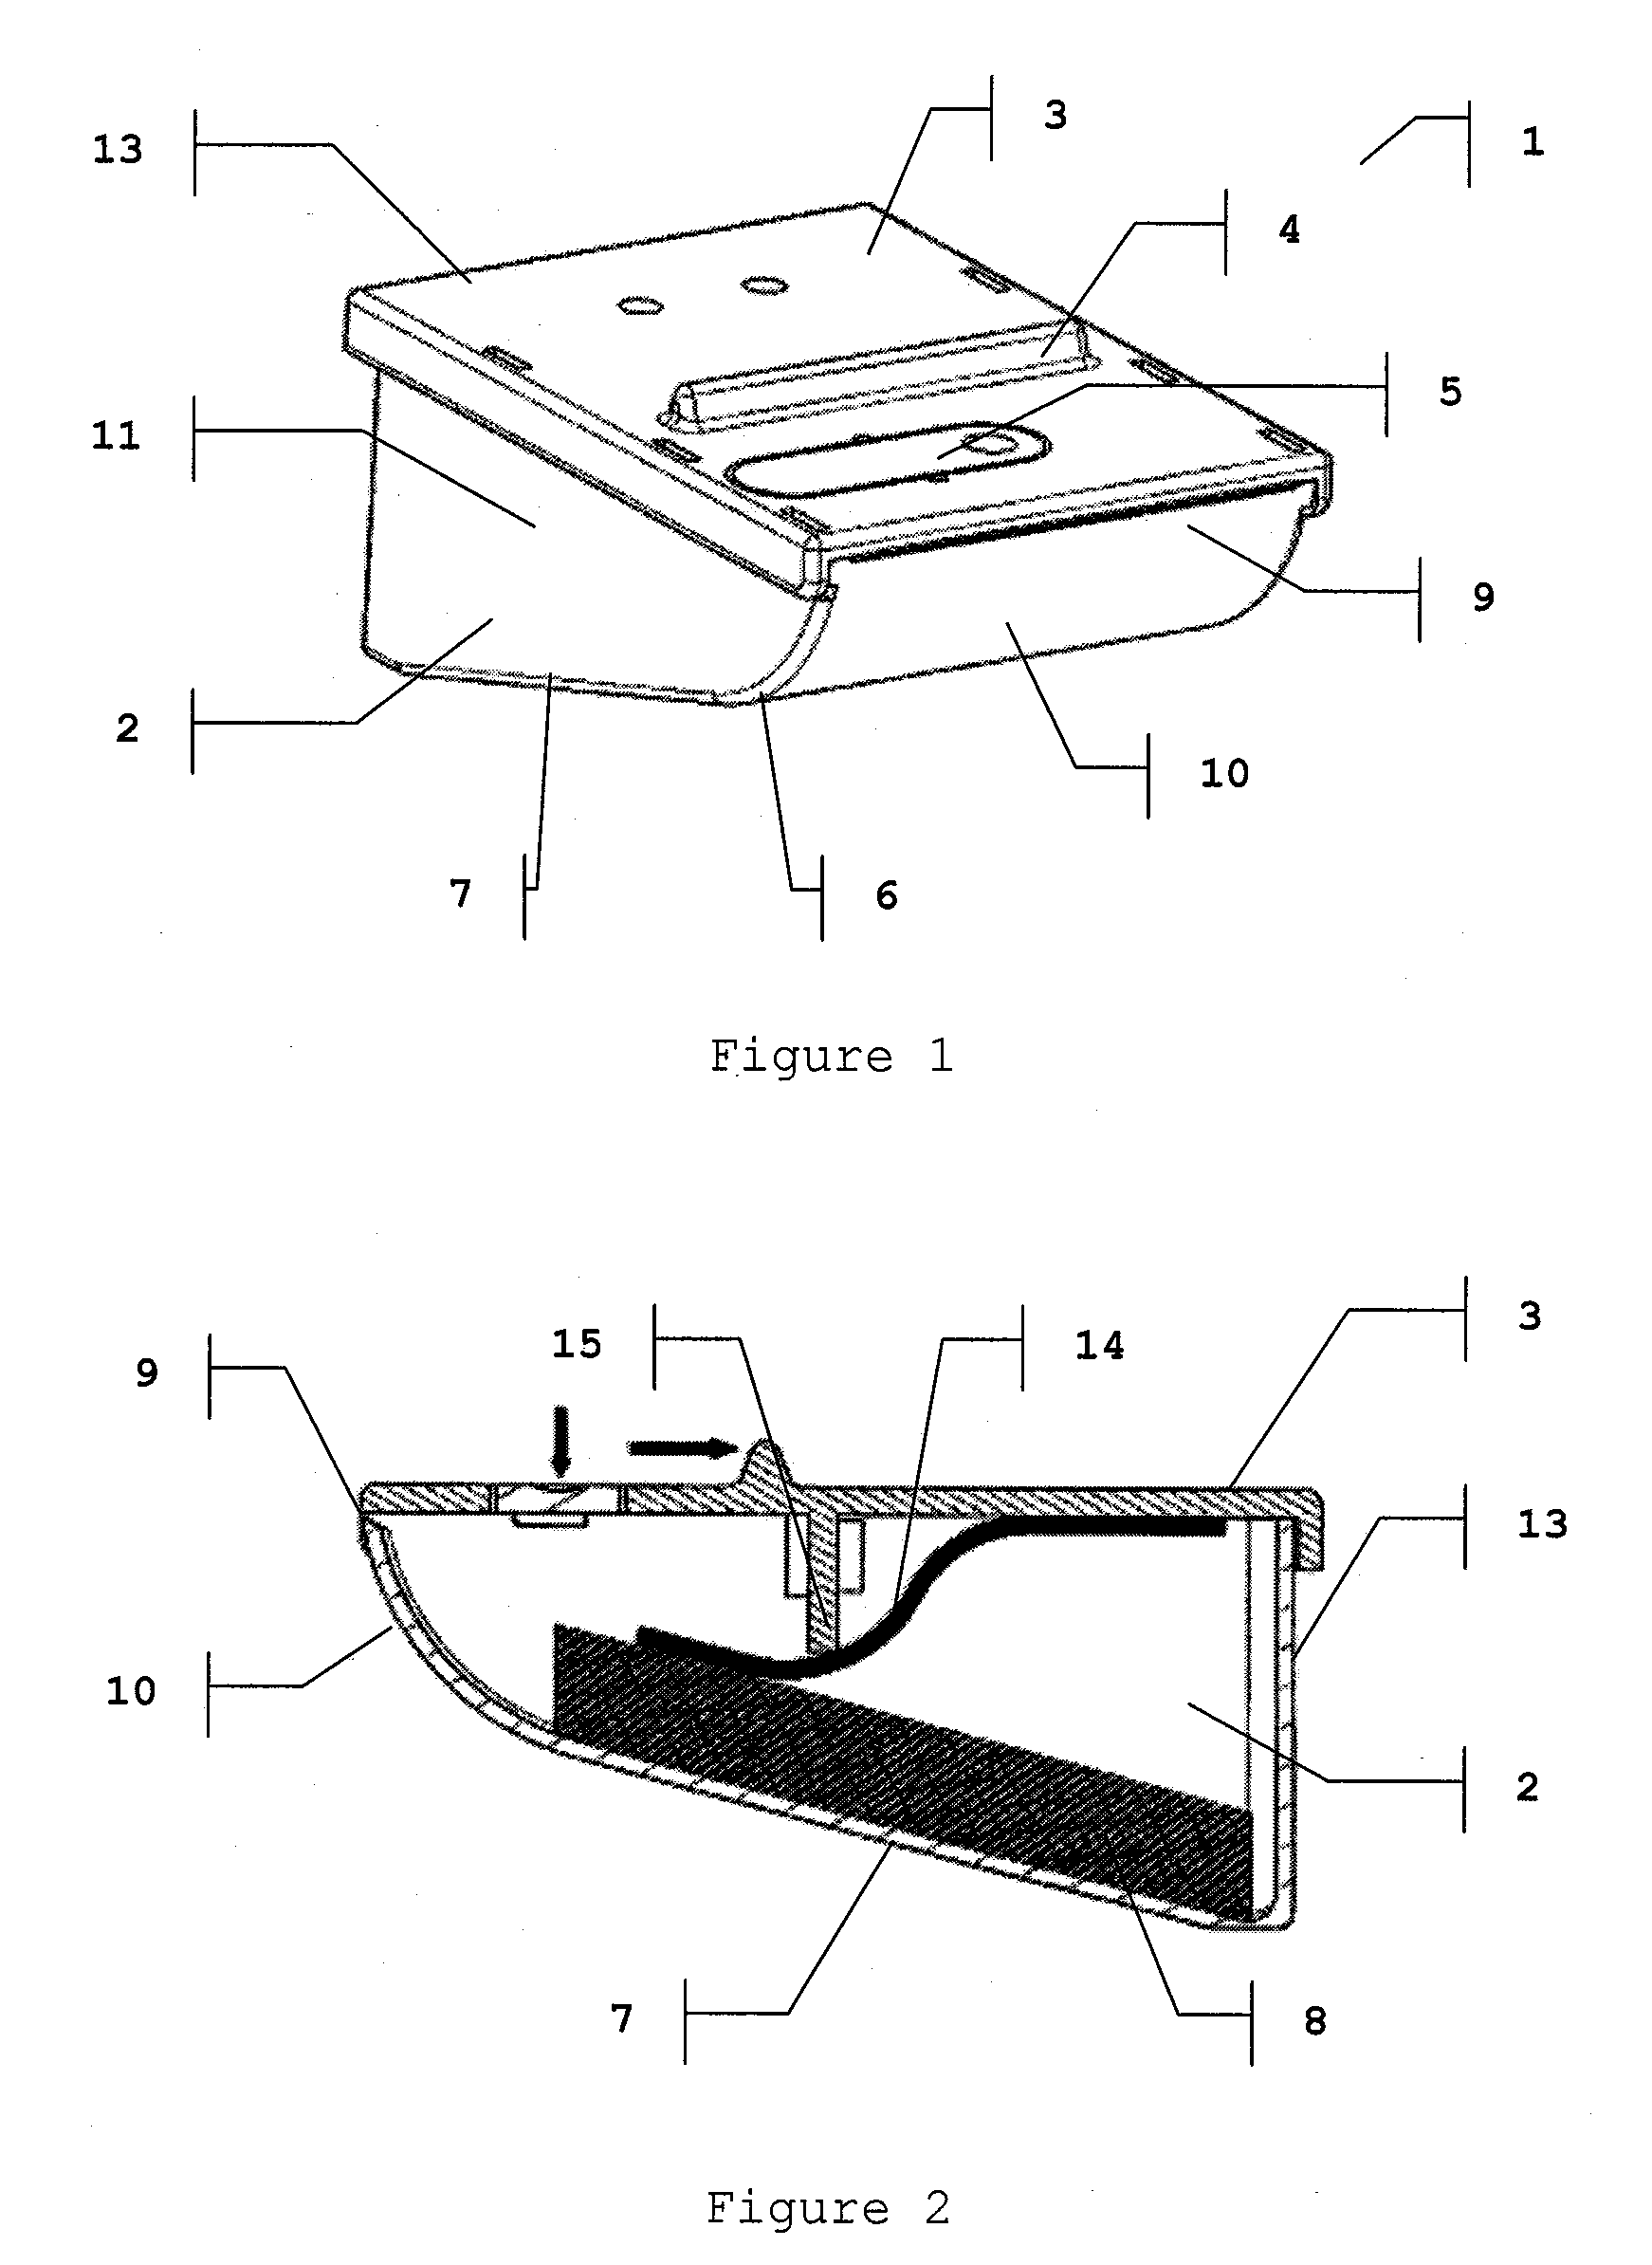 Device for storing and dispensing in single units objects in the form of sheets or thin strips